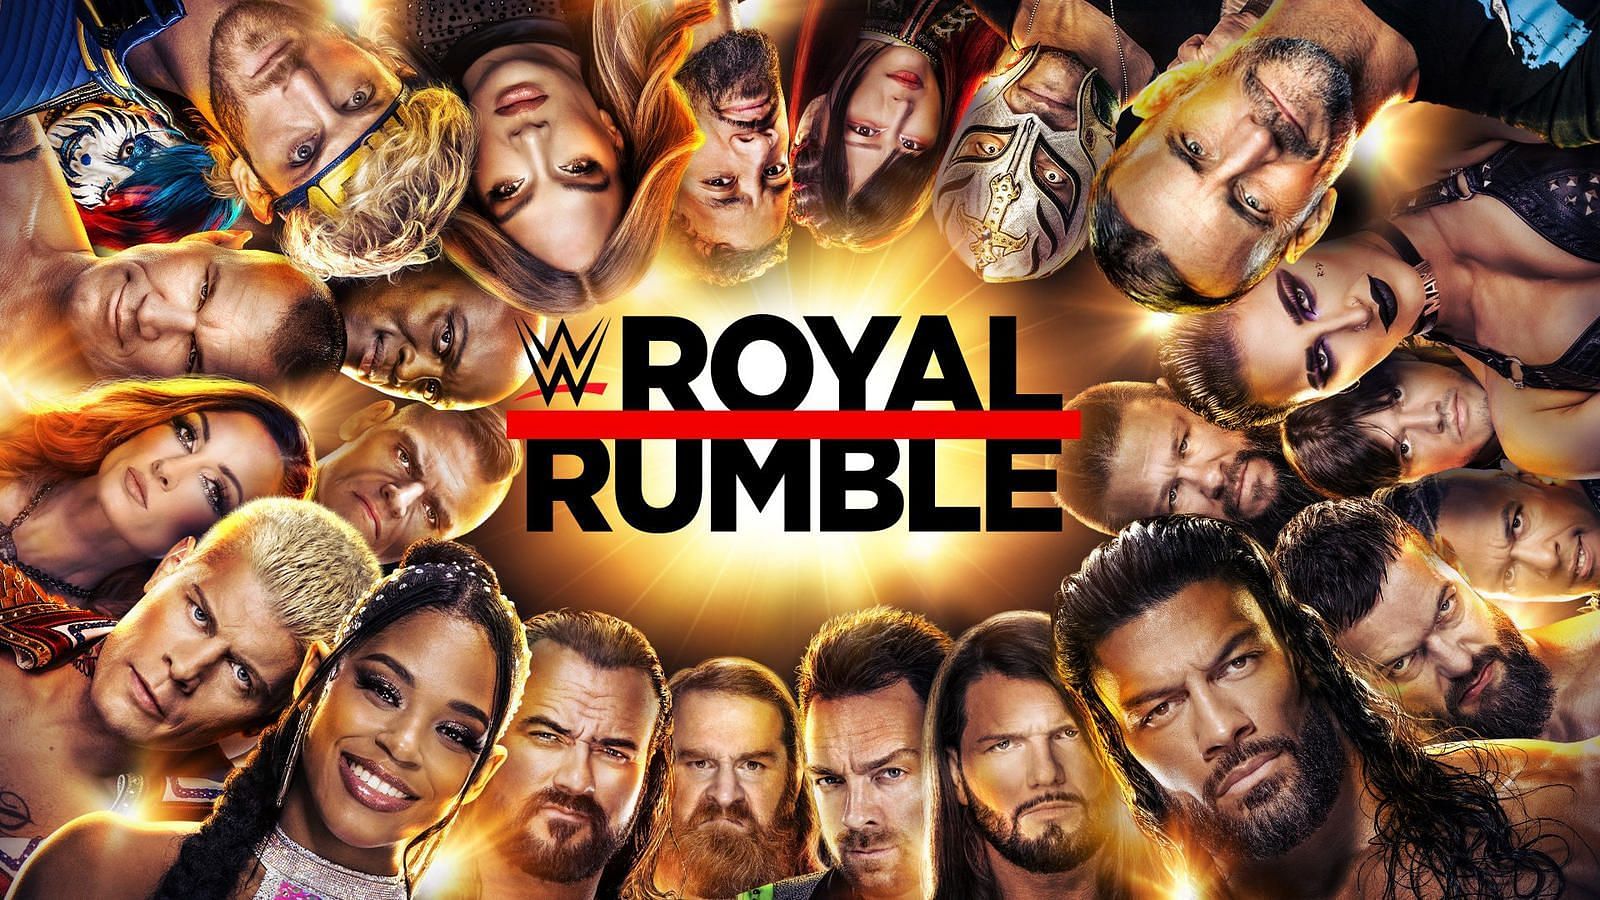 The Royal Rumble promises to entertain